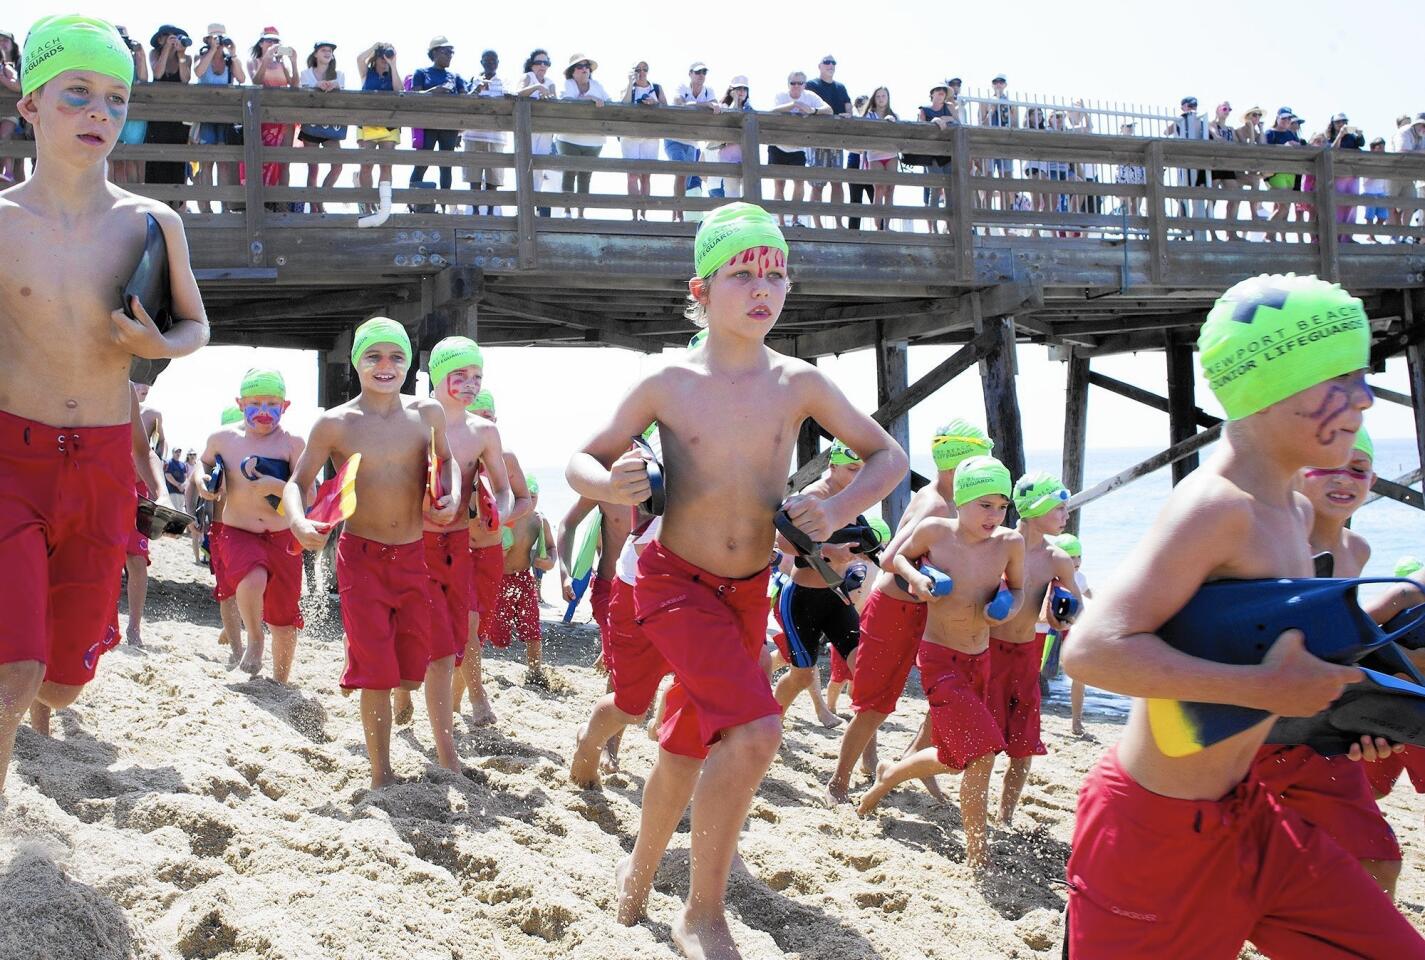 The boys' group D start their run during the annual monster mile event for the Newport Beach junior lifeguards at the Balboa Pier on Thursday, July 30.